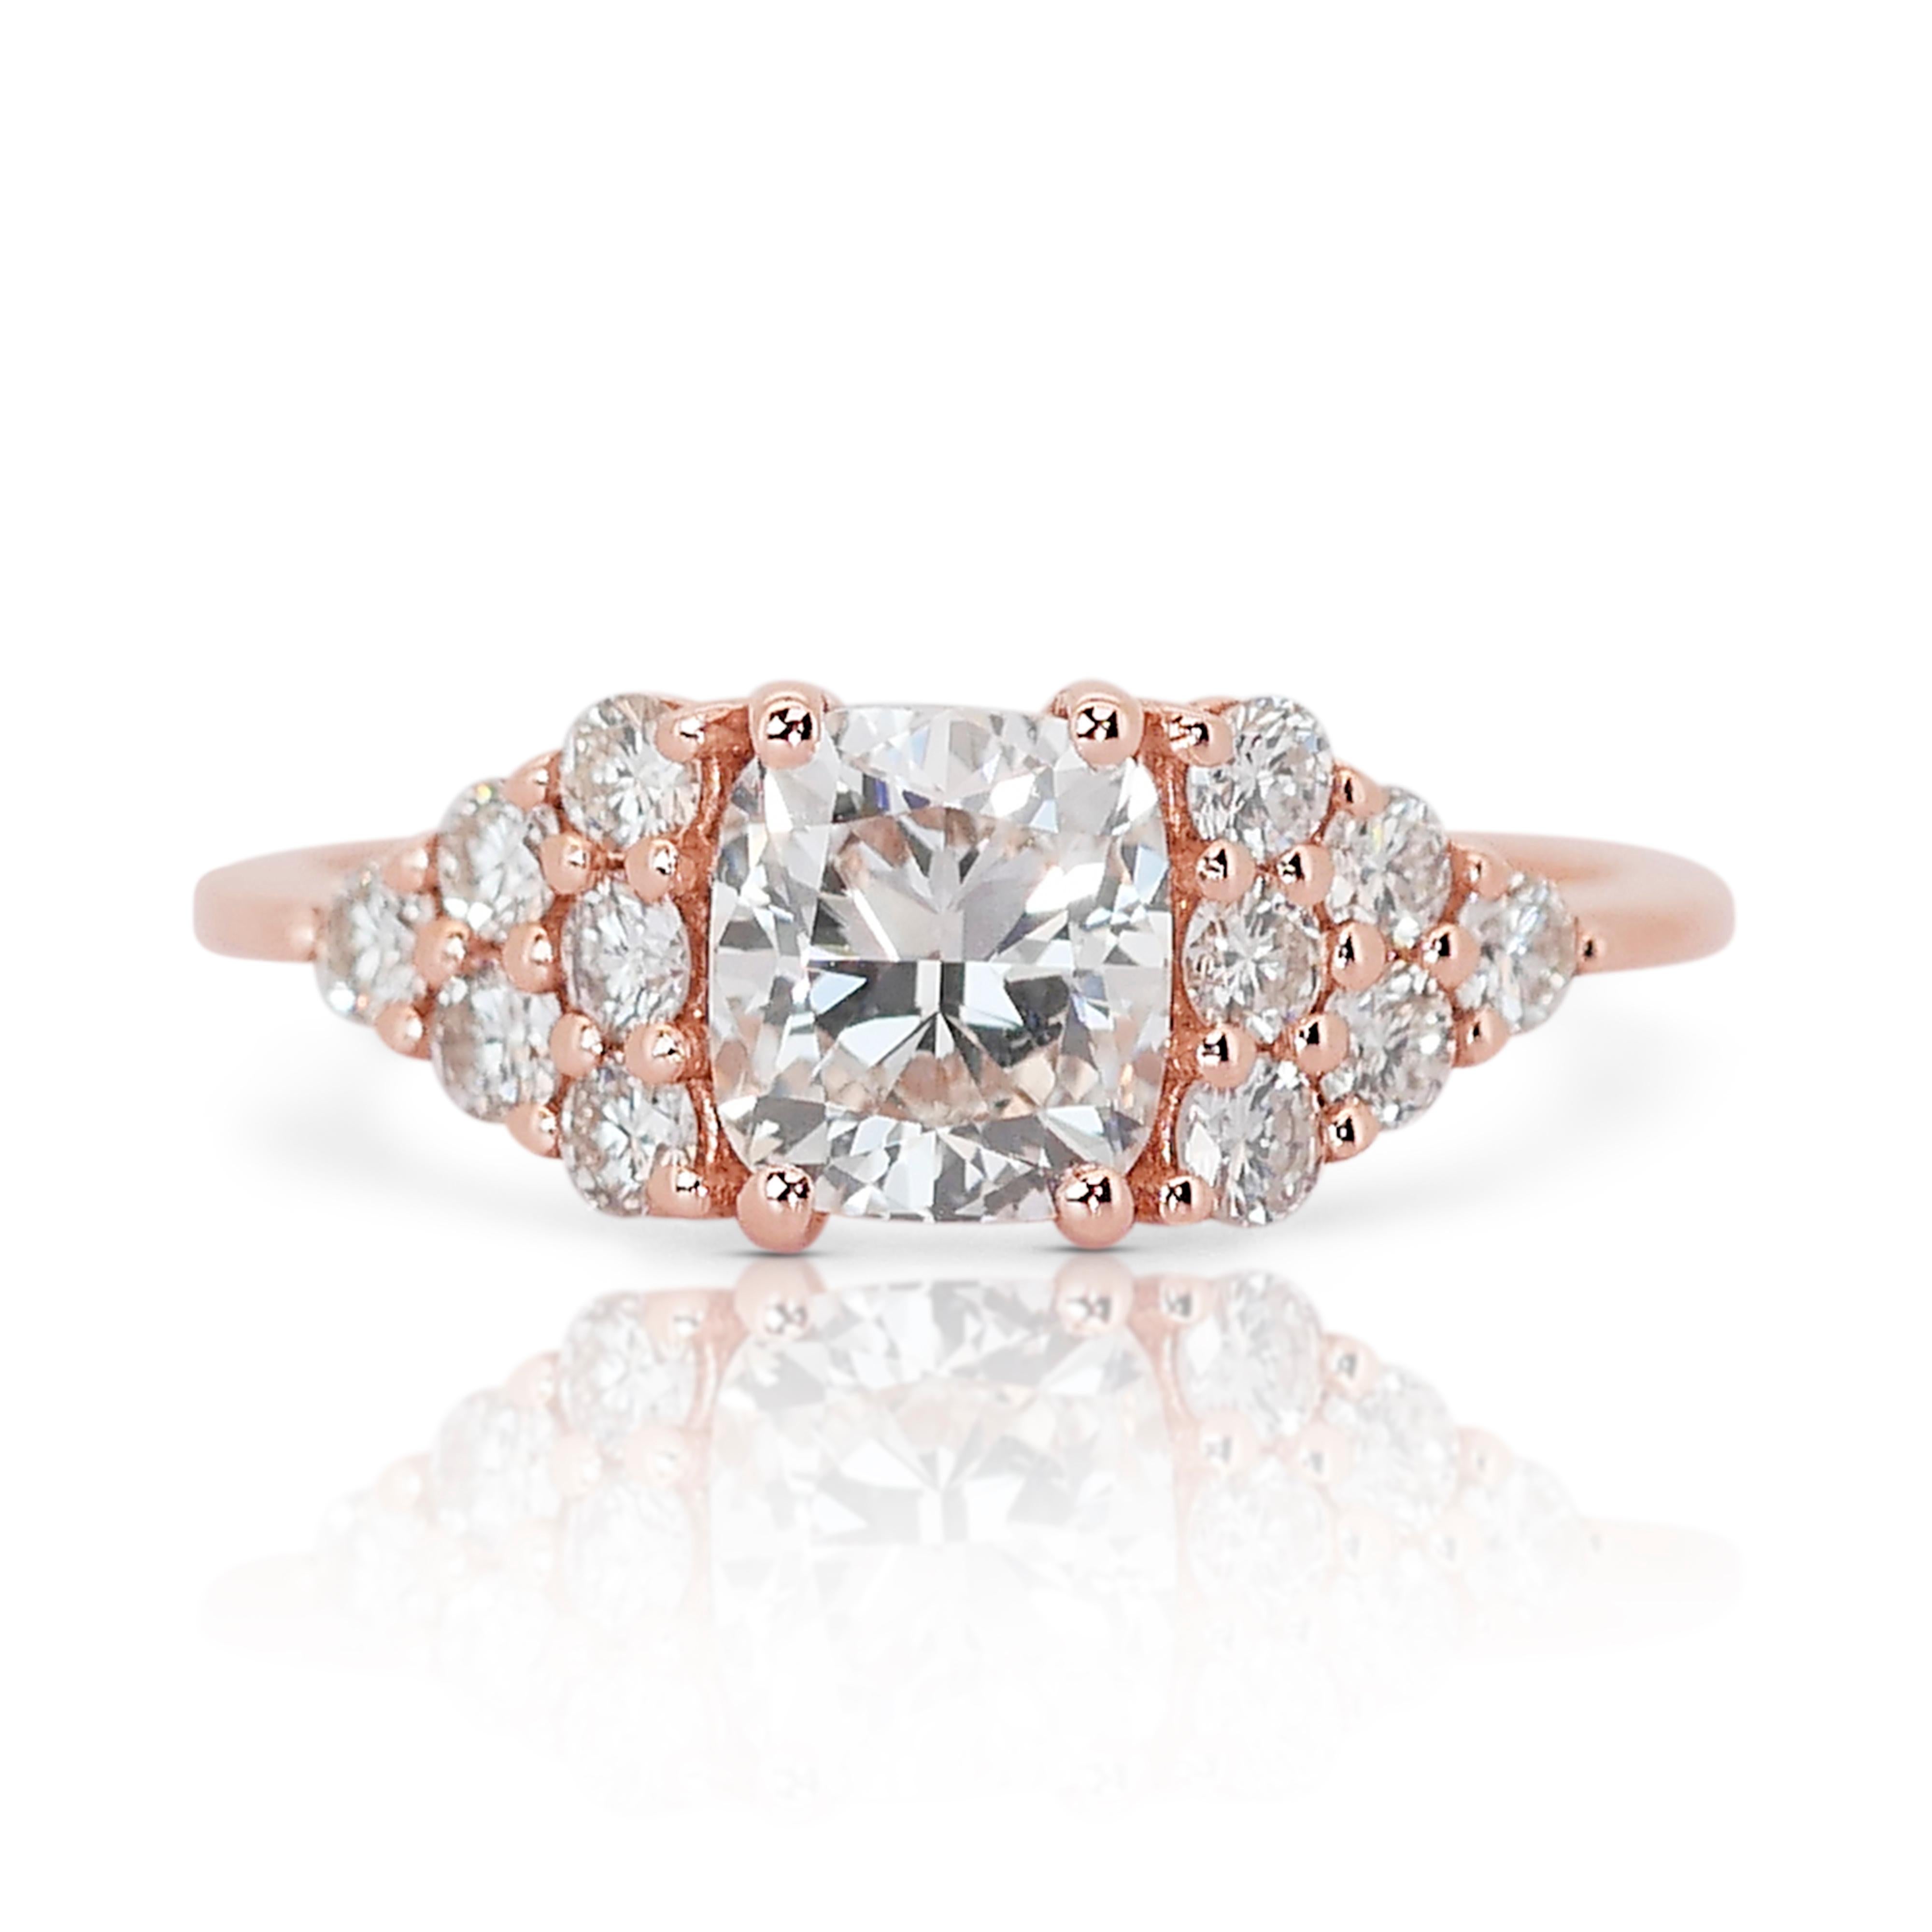 Lovely 1.65ct Diamonds Pave Ring in 14k Rose Gold - IGI Certified For Sale 3